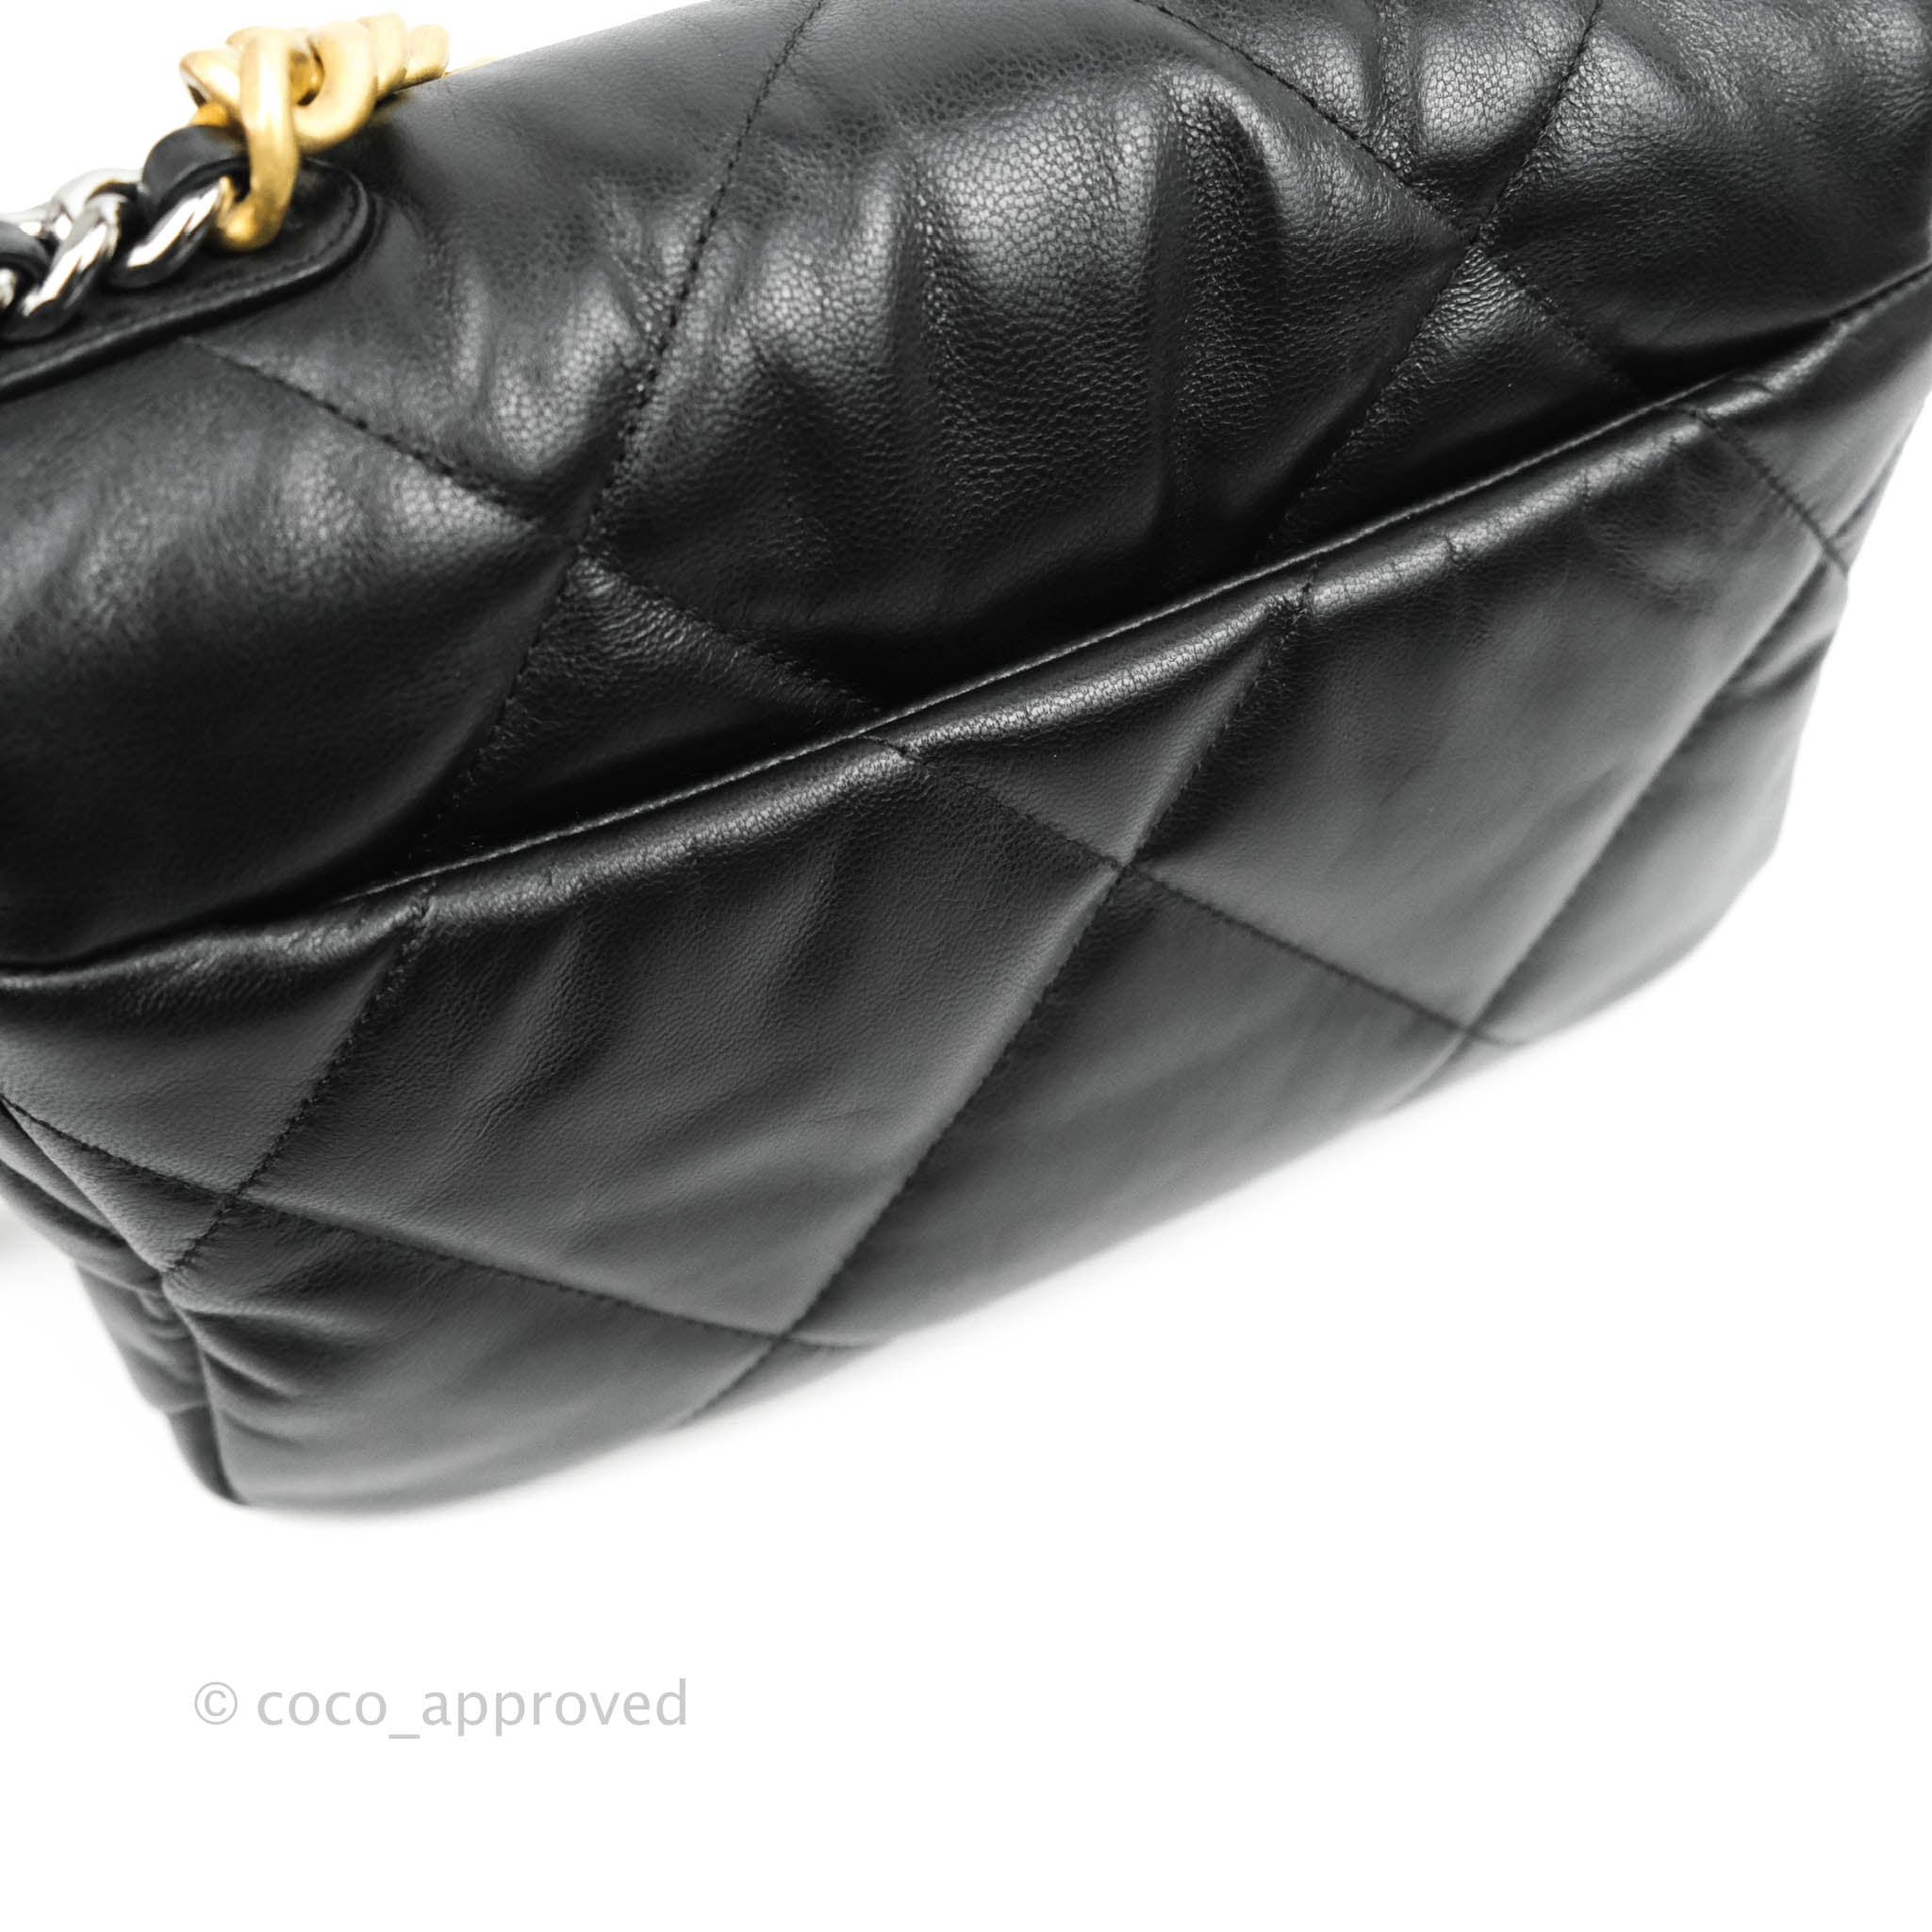 Chanel 19 Black Flap Bag⁣ Small Goatskin – Coco Approved Studio